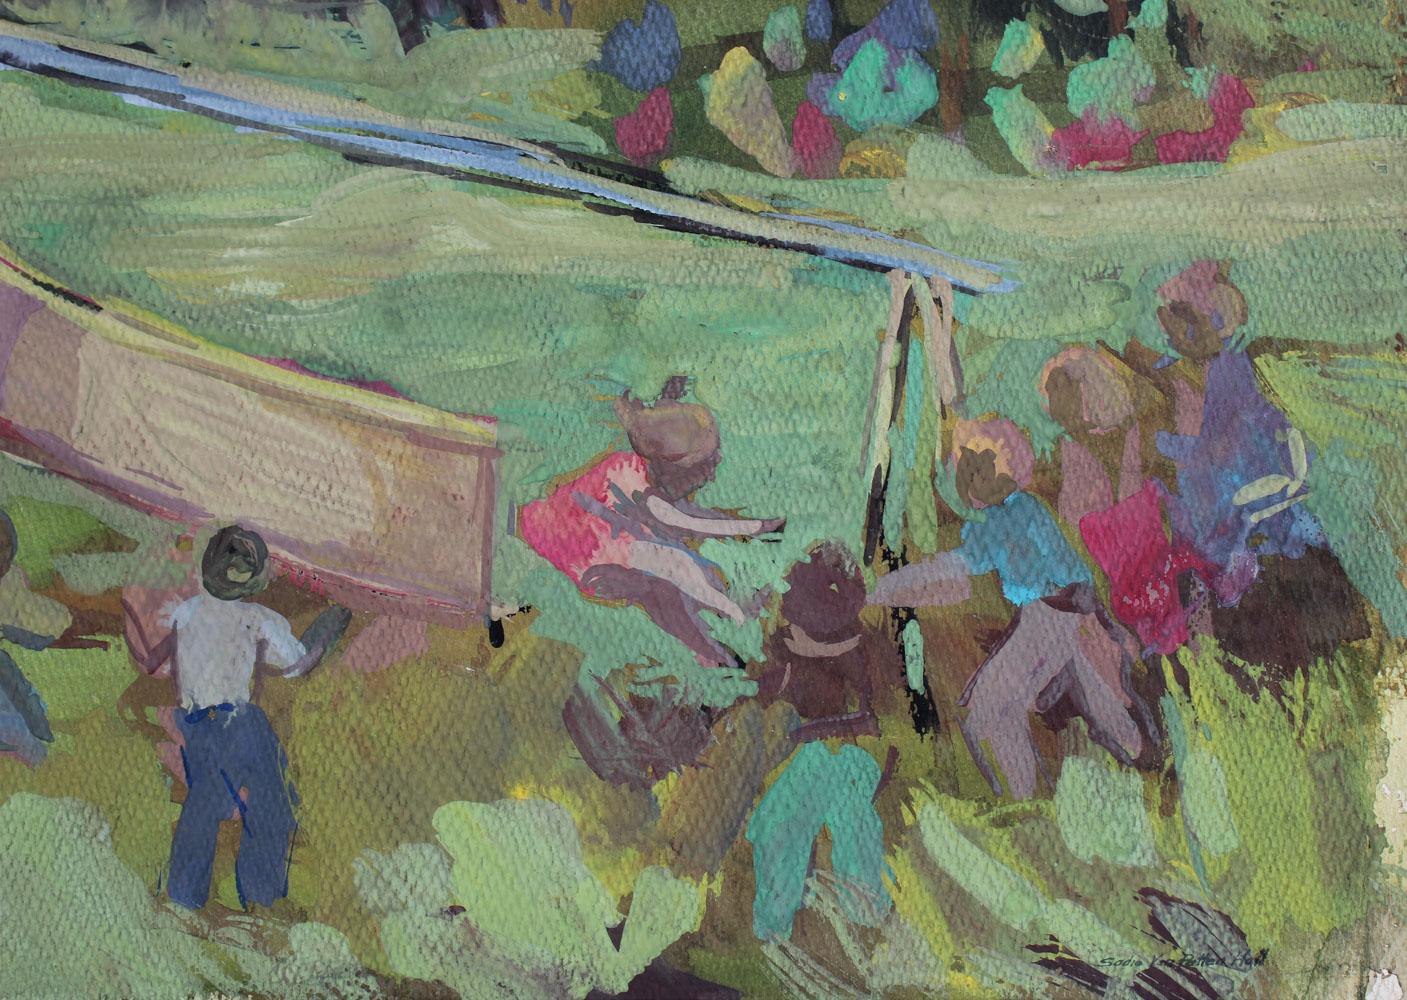 Landscape with Children Playing on a Slide in Gouache, Mid 20th Century - Art by Sadie Van Patten Hall